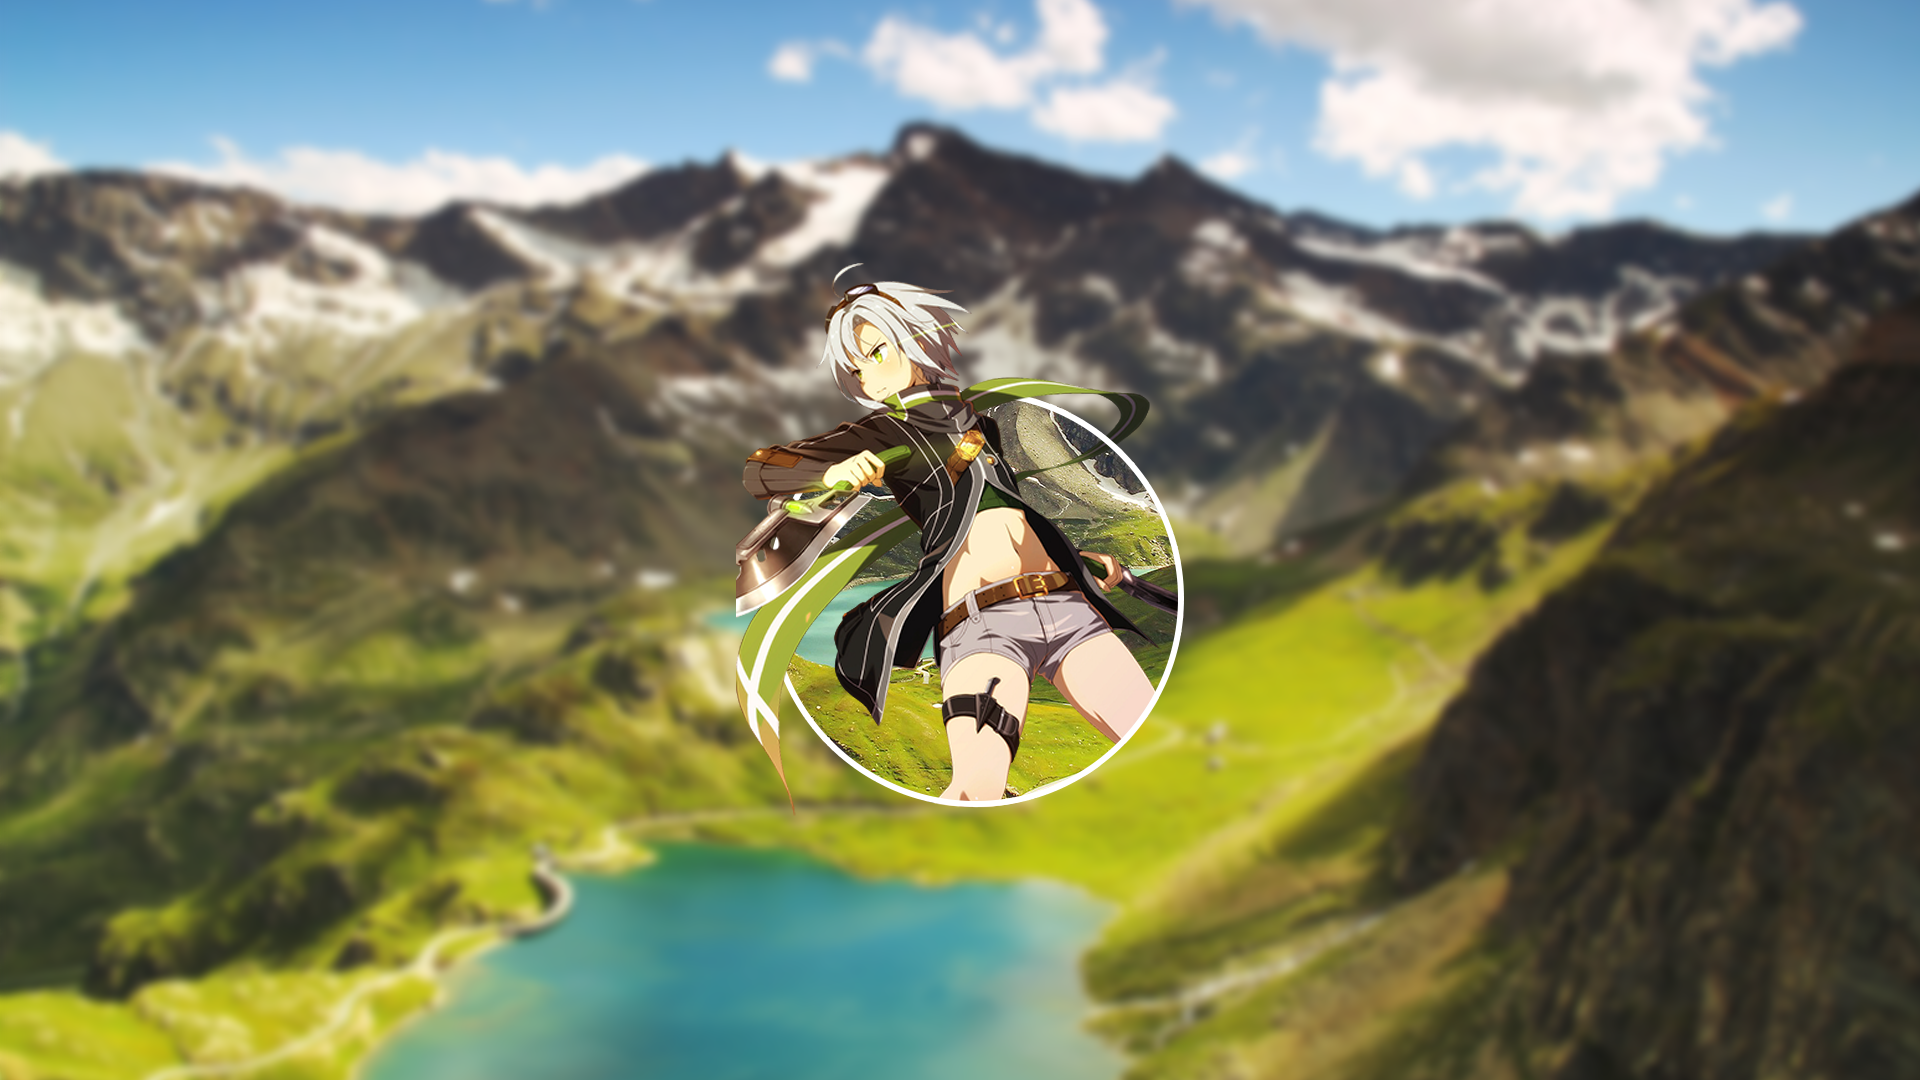 Anime 1920x1080 anime blurred minimalism nature glacier lakes Alps mountains Italy belly blonde anime girls pants